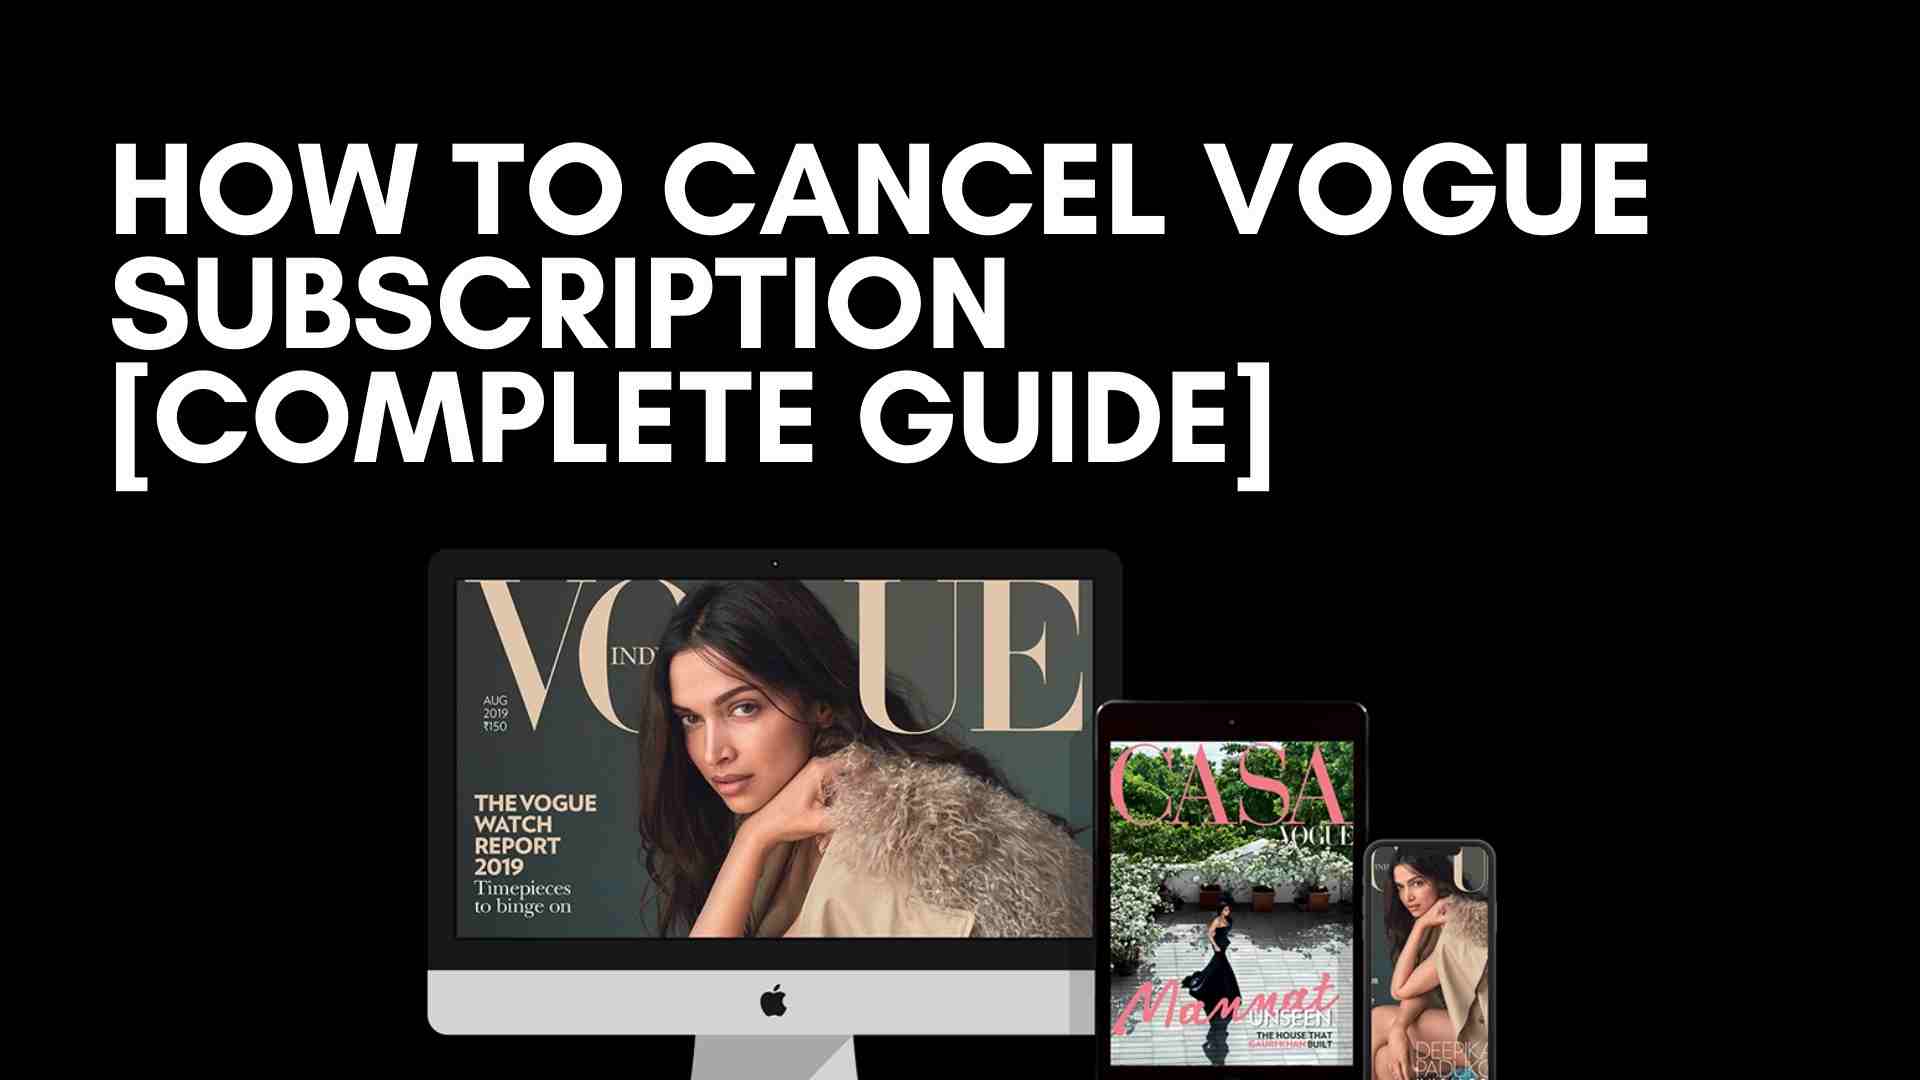 How to Cancel Vogue Subscription